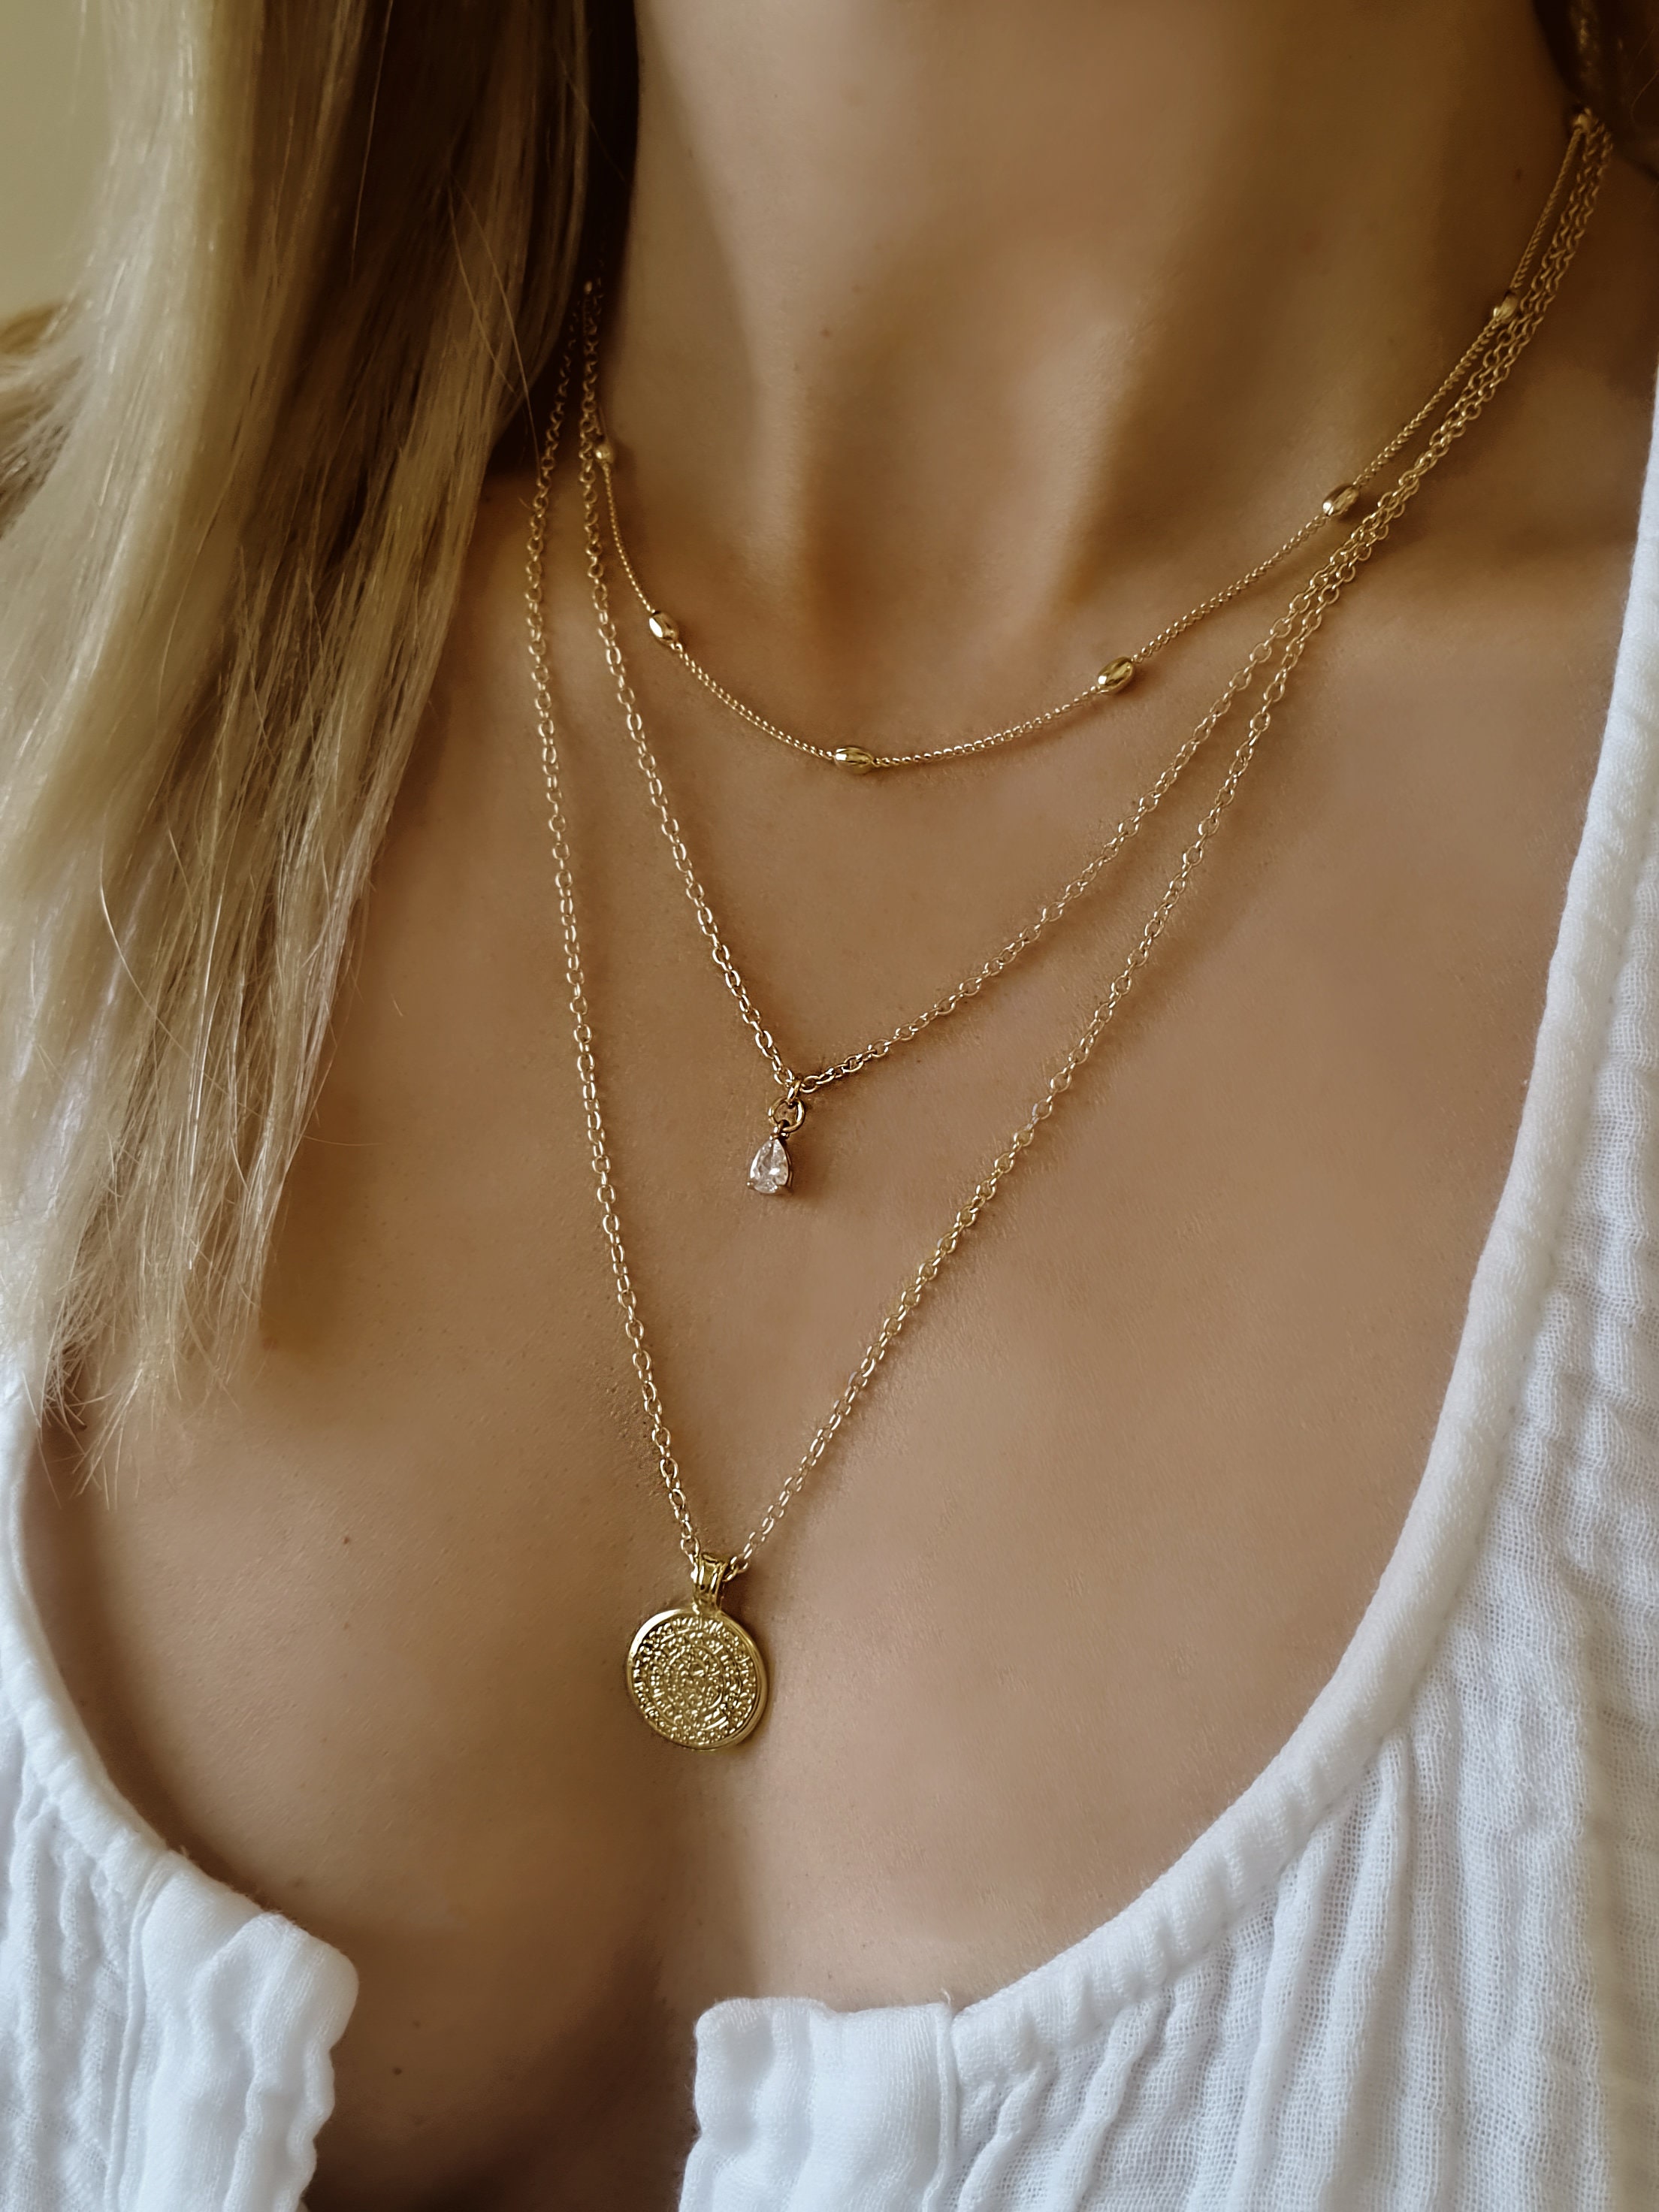 Make Your Own 3 Layer Necklace